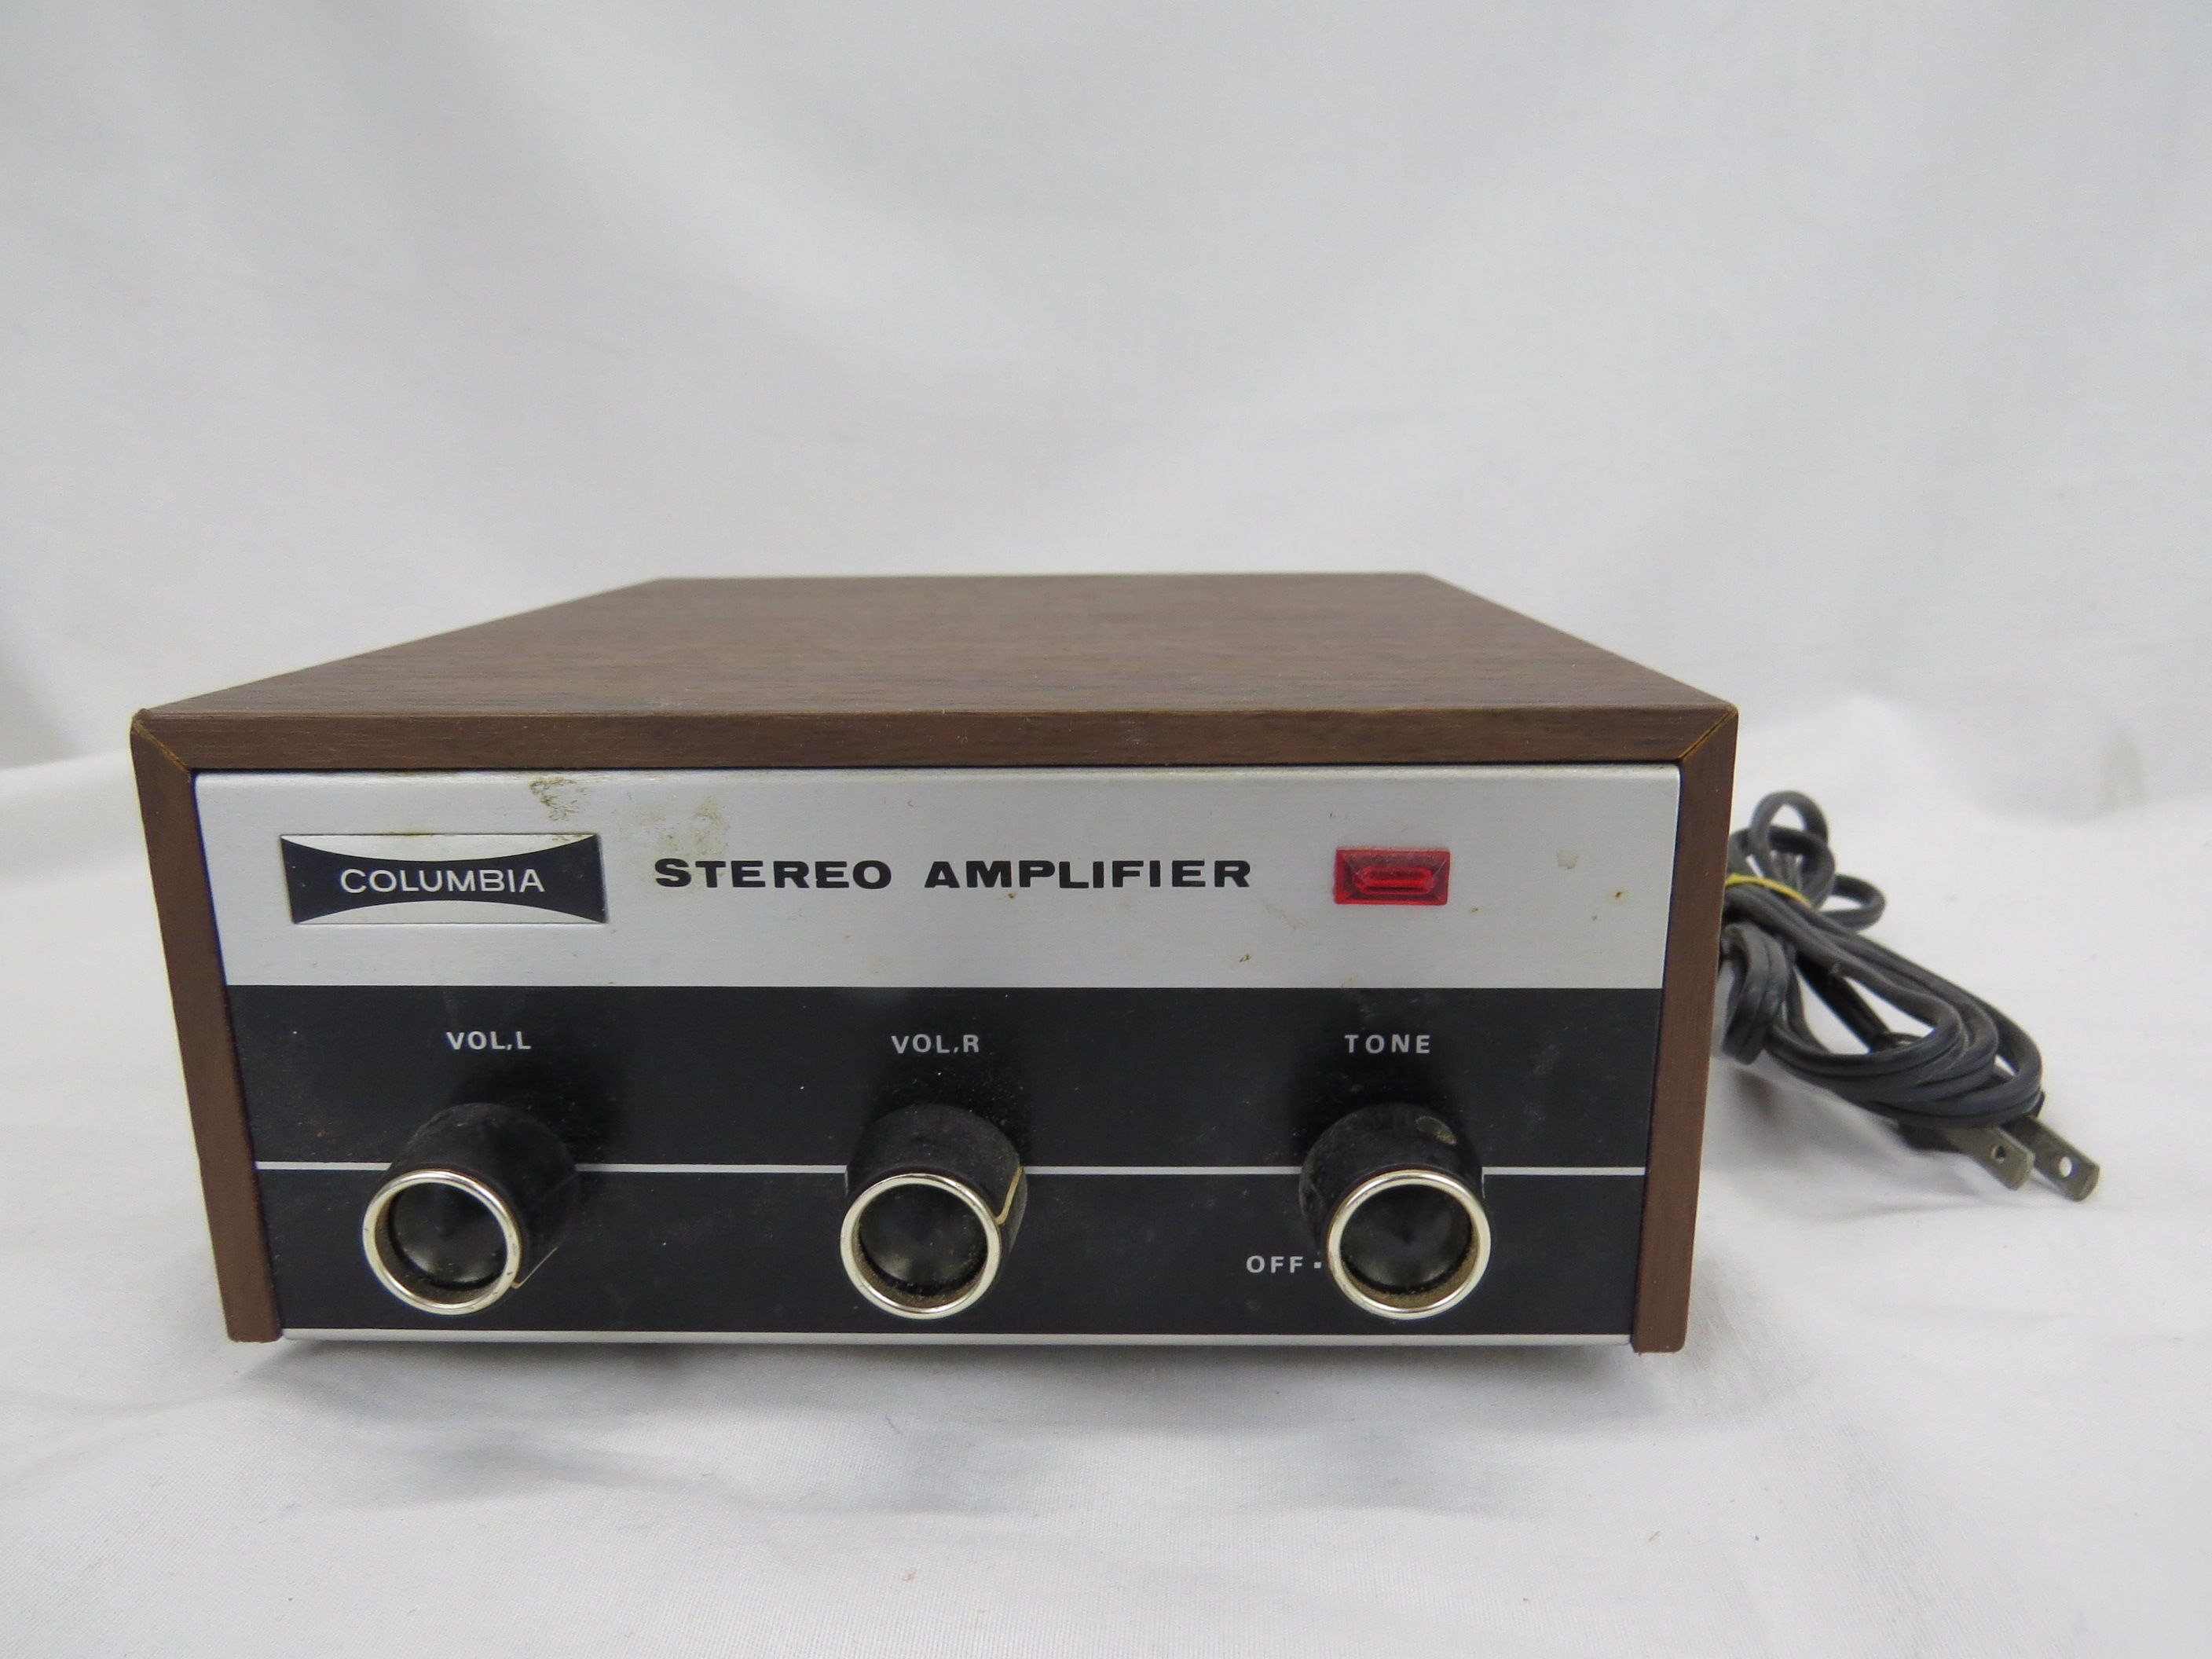 VTG Columbia 2734 Stereo Amplifier - Parts or Repair